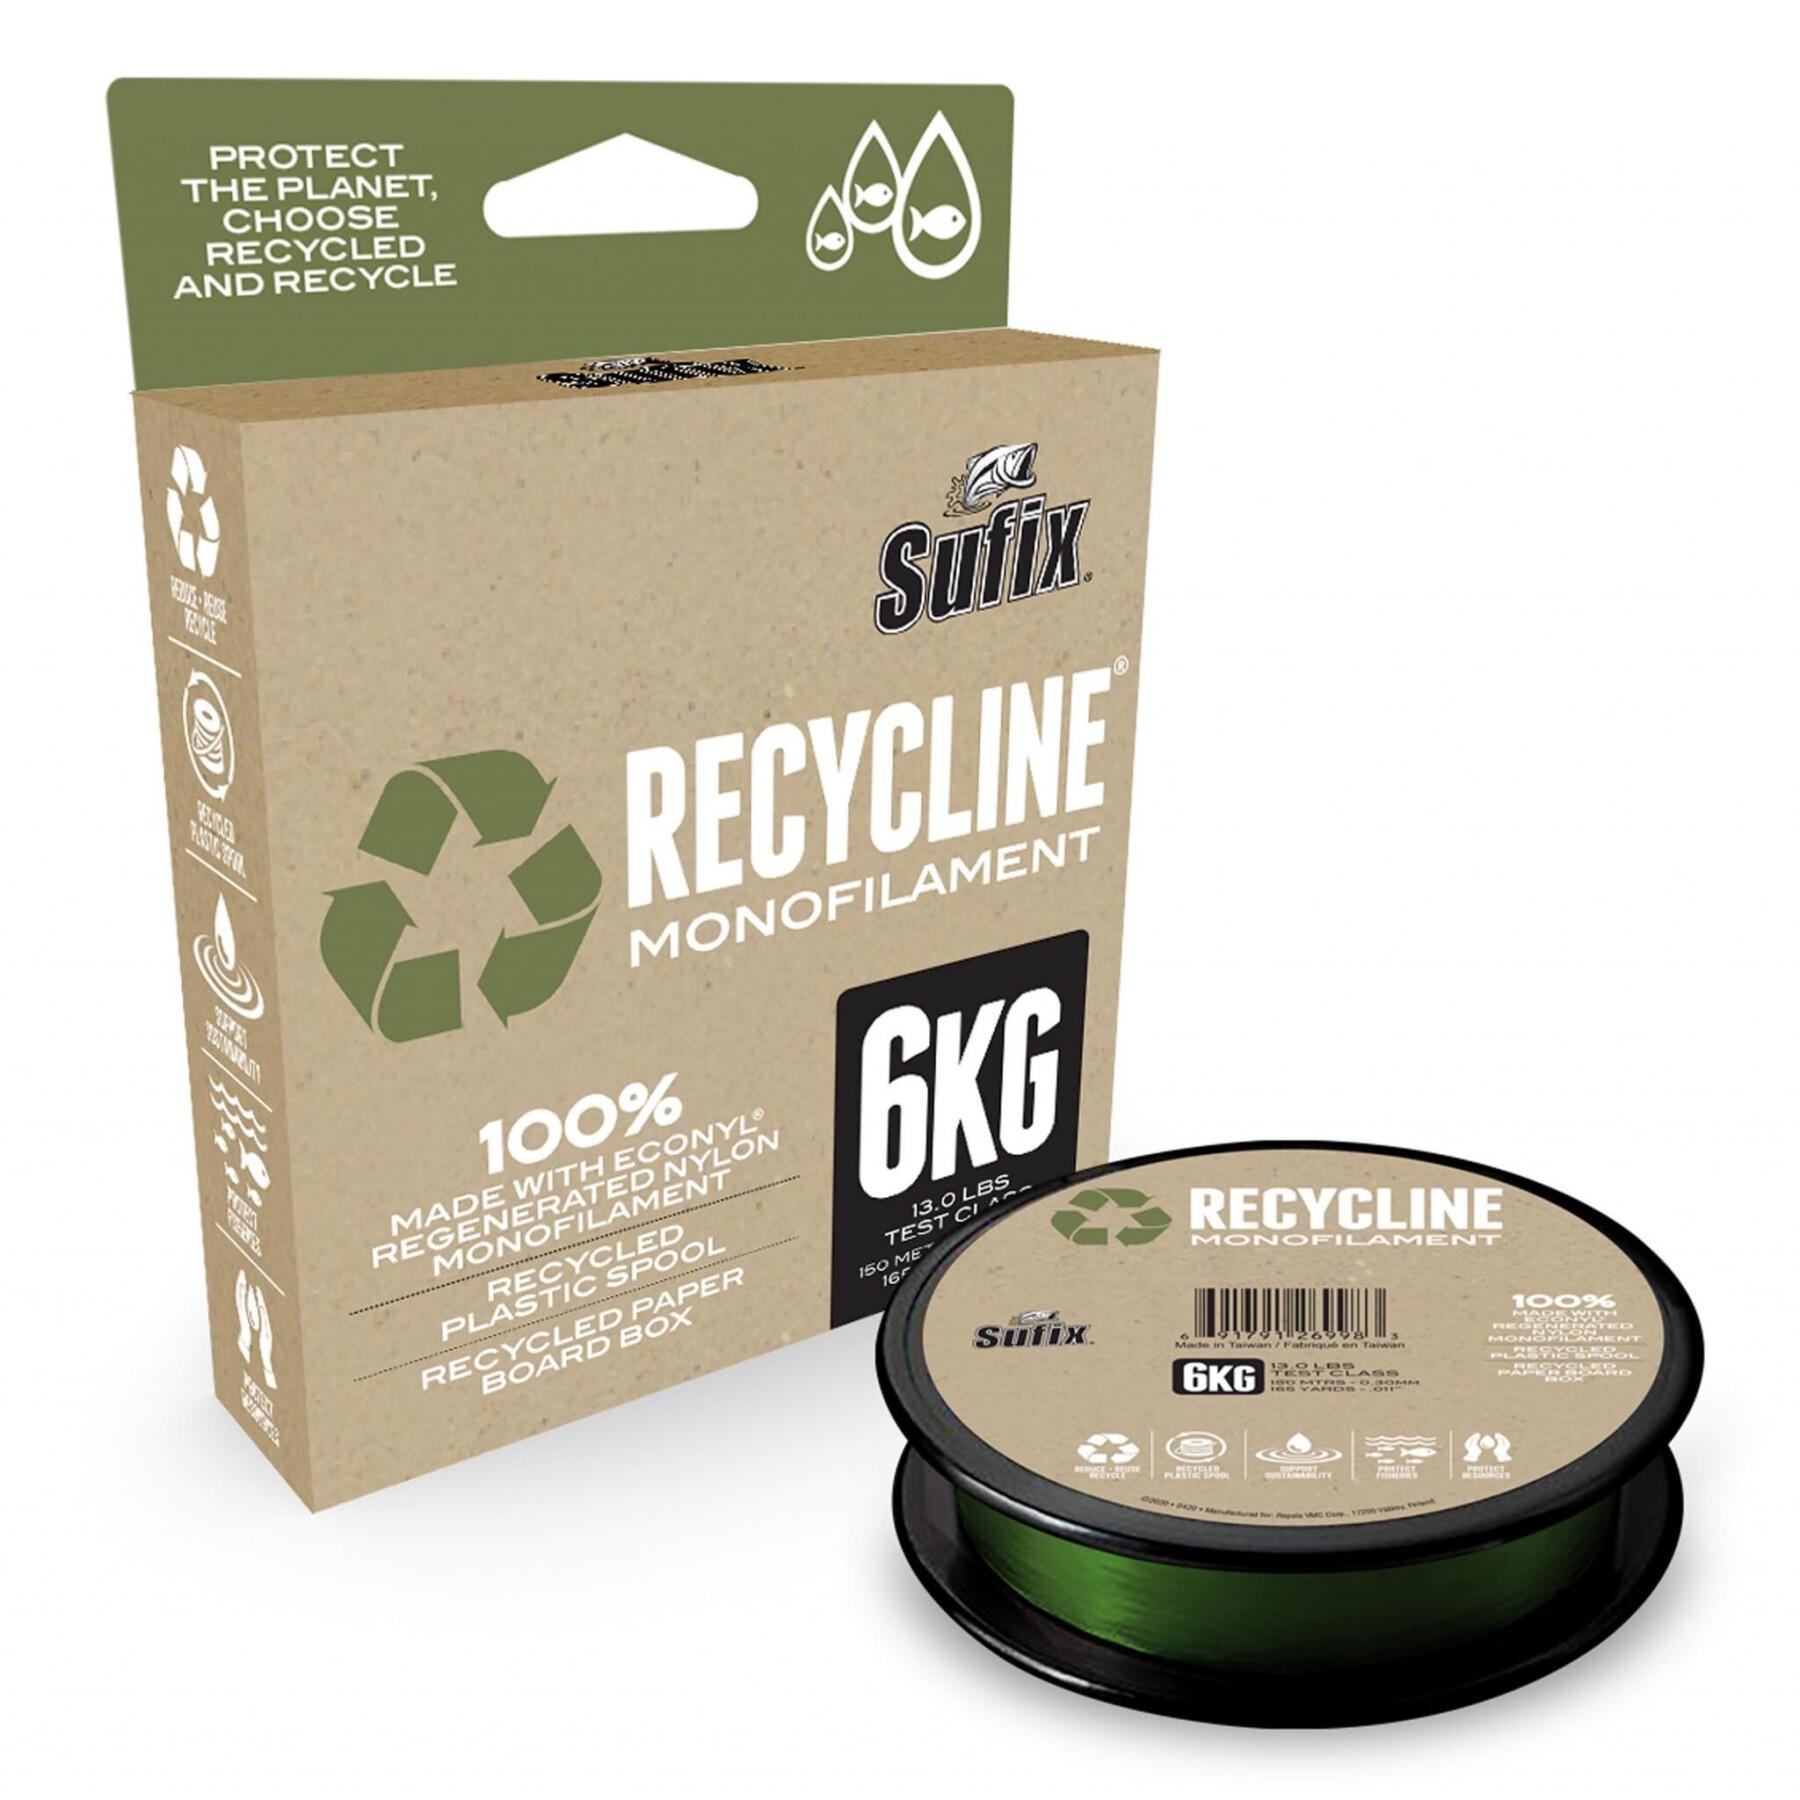 Recycled monofilament Sufix 300 m